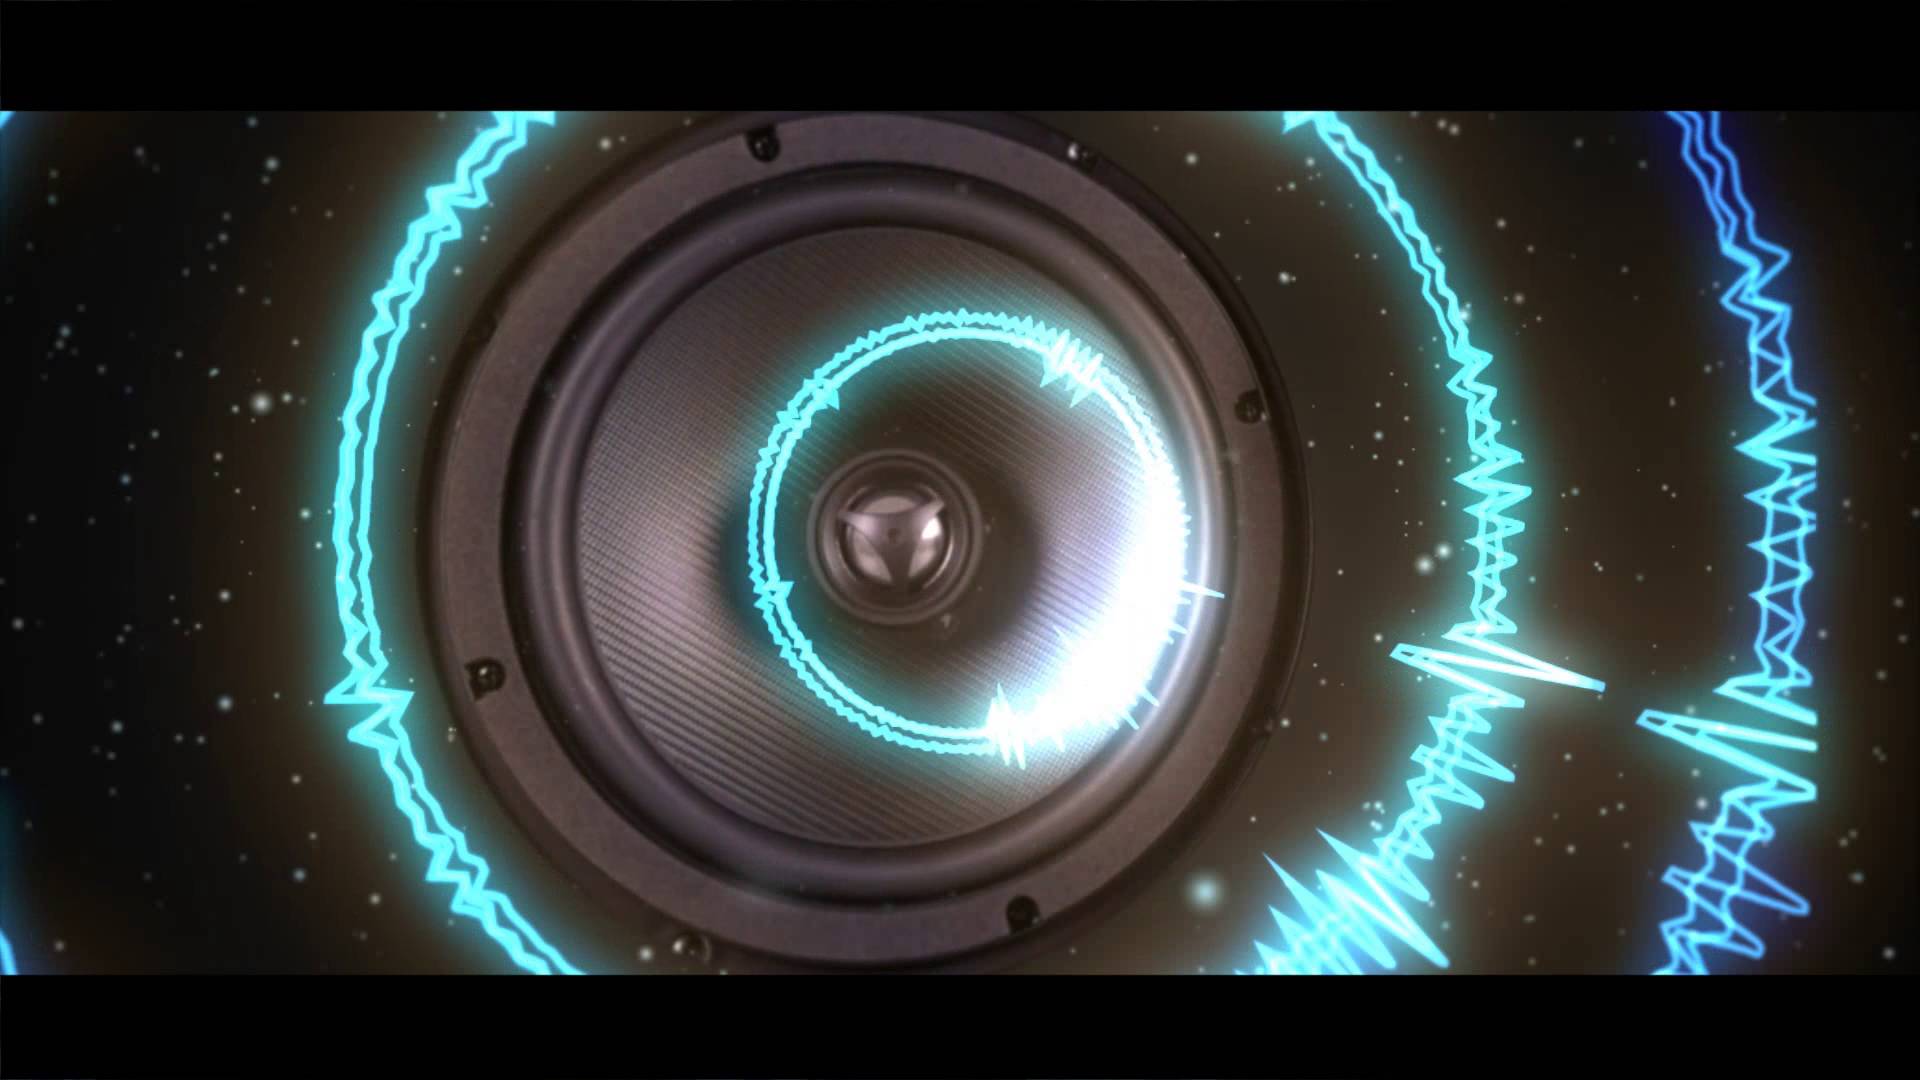 Subwoofer Sounds for Adobe After Effects CS6 Audio visualization